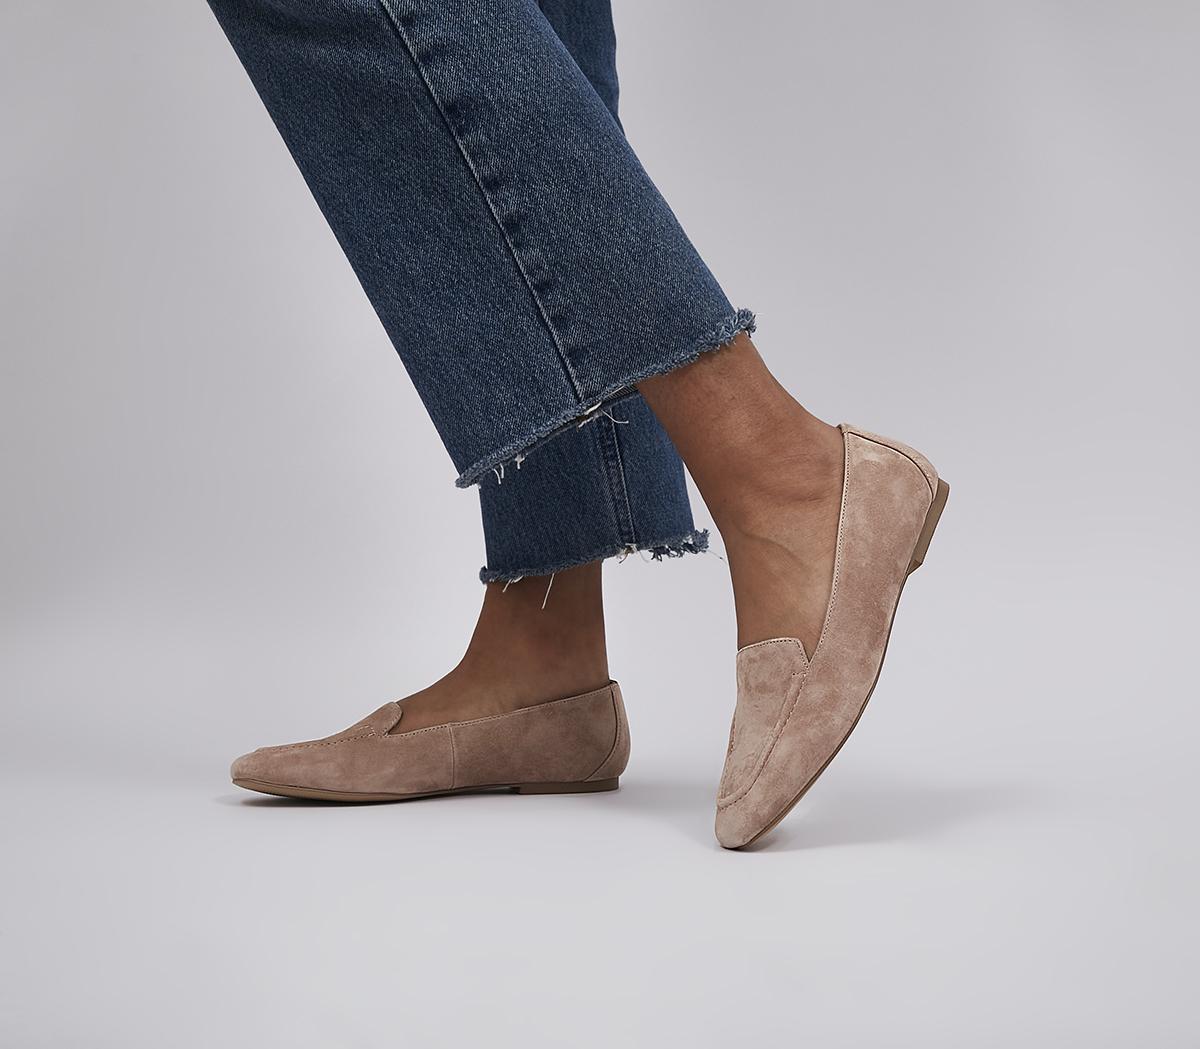 OFFICEFlying Plain Soft LoafersBlush Suede